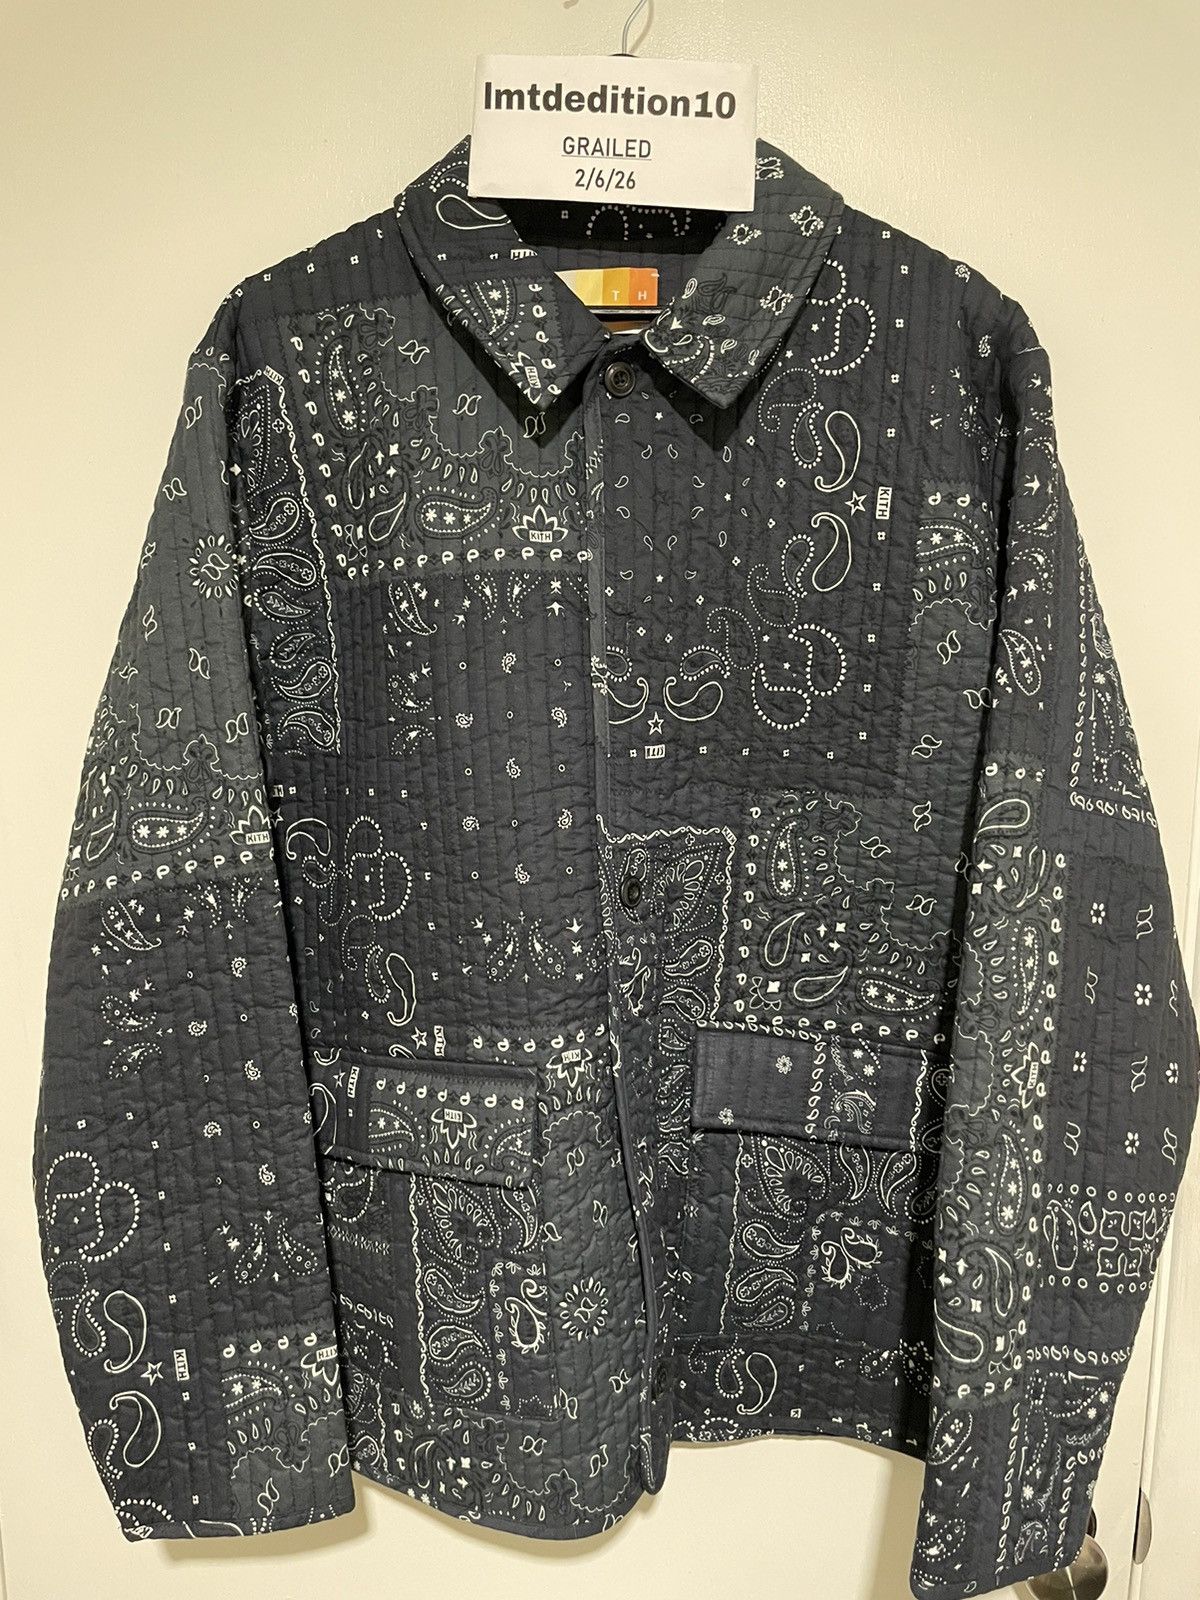 Kith Res Ipsa Tapestry Coaches Jacket Allure for Men